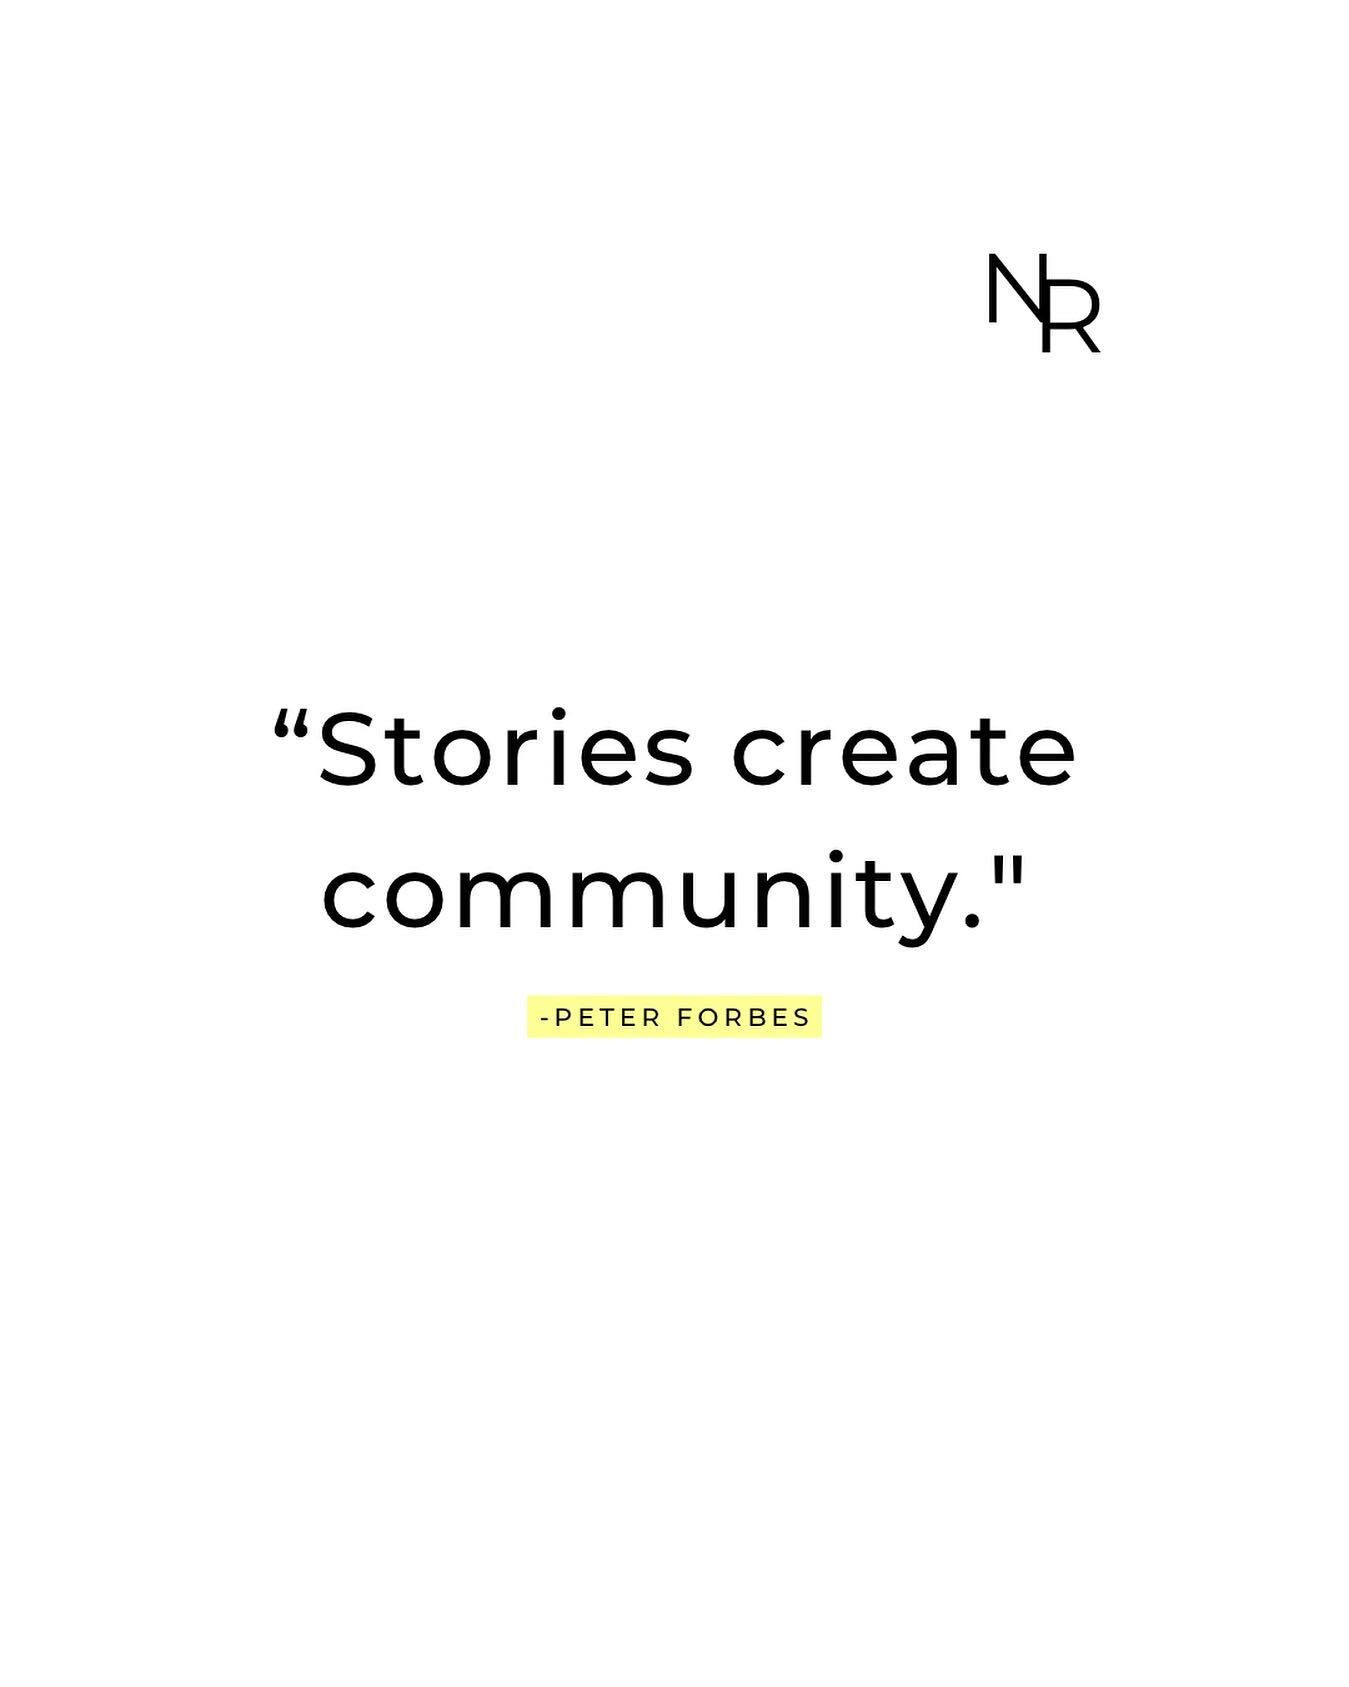 Stories create communities.
It&rsquo;s true! I see it at all the time.

Book Clubs.
Watch Parties.
Writing Circles.

I have witnessed two strangers become instant best friends at a random BBQ, when they both discovered that they liked the same true c